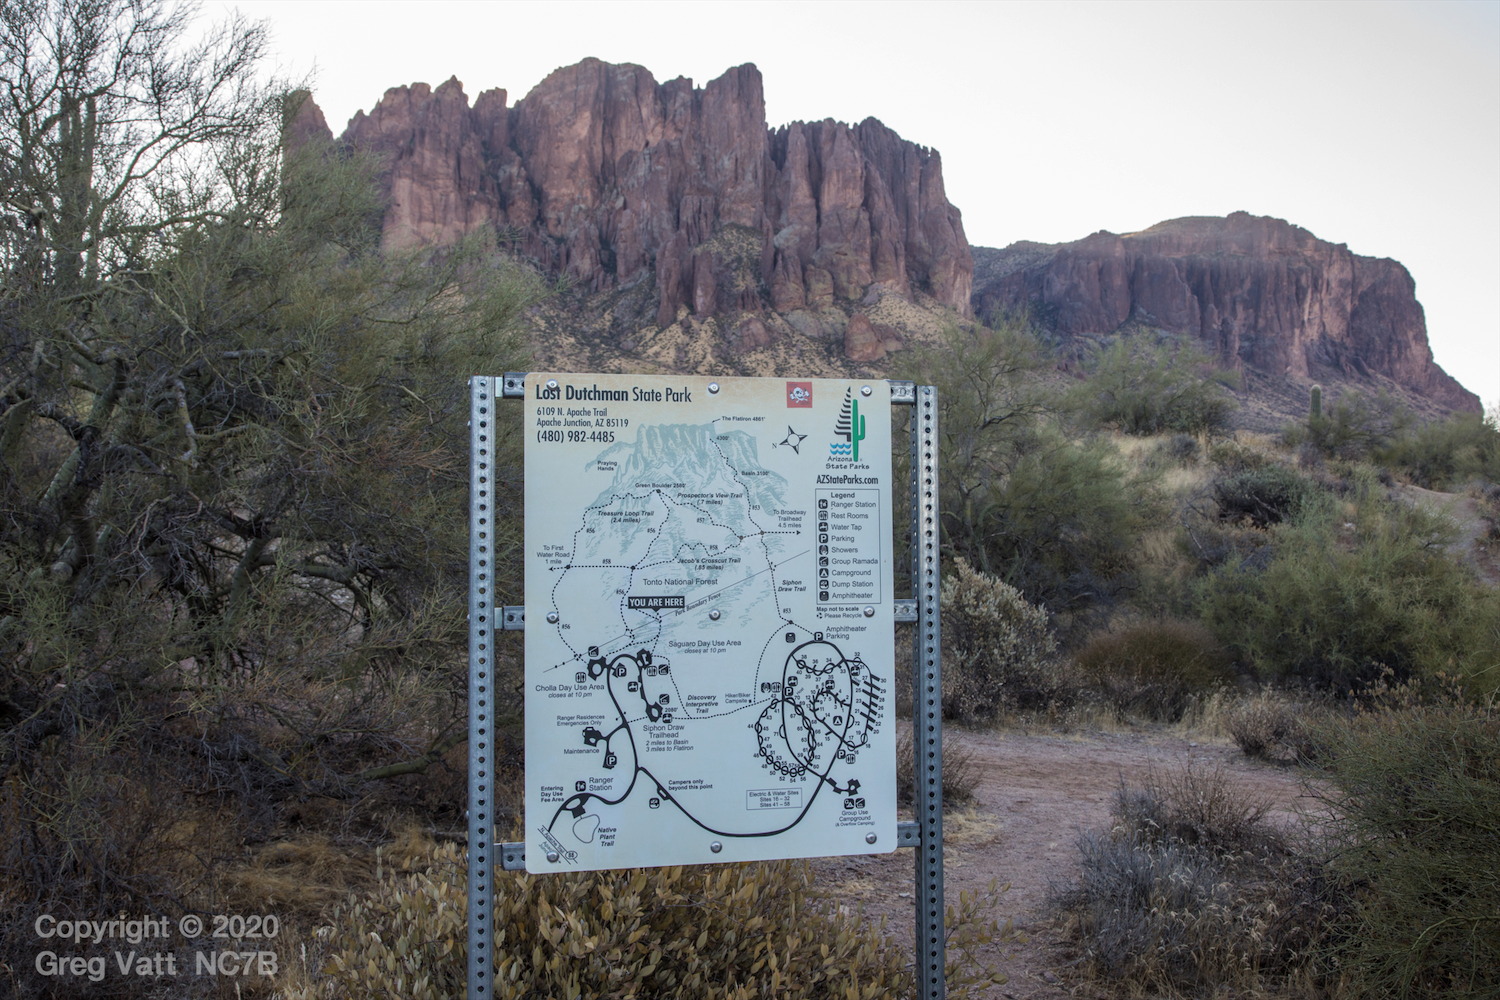 The trail map at the Lost Dutchman State Park.